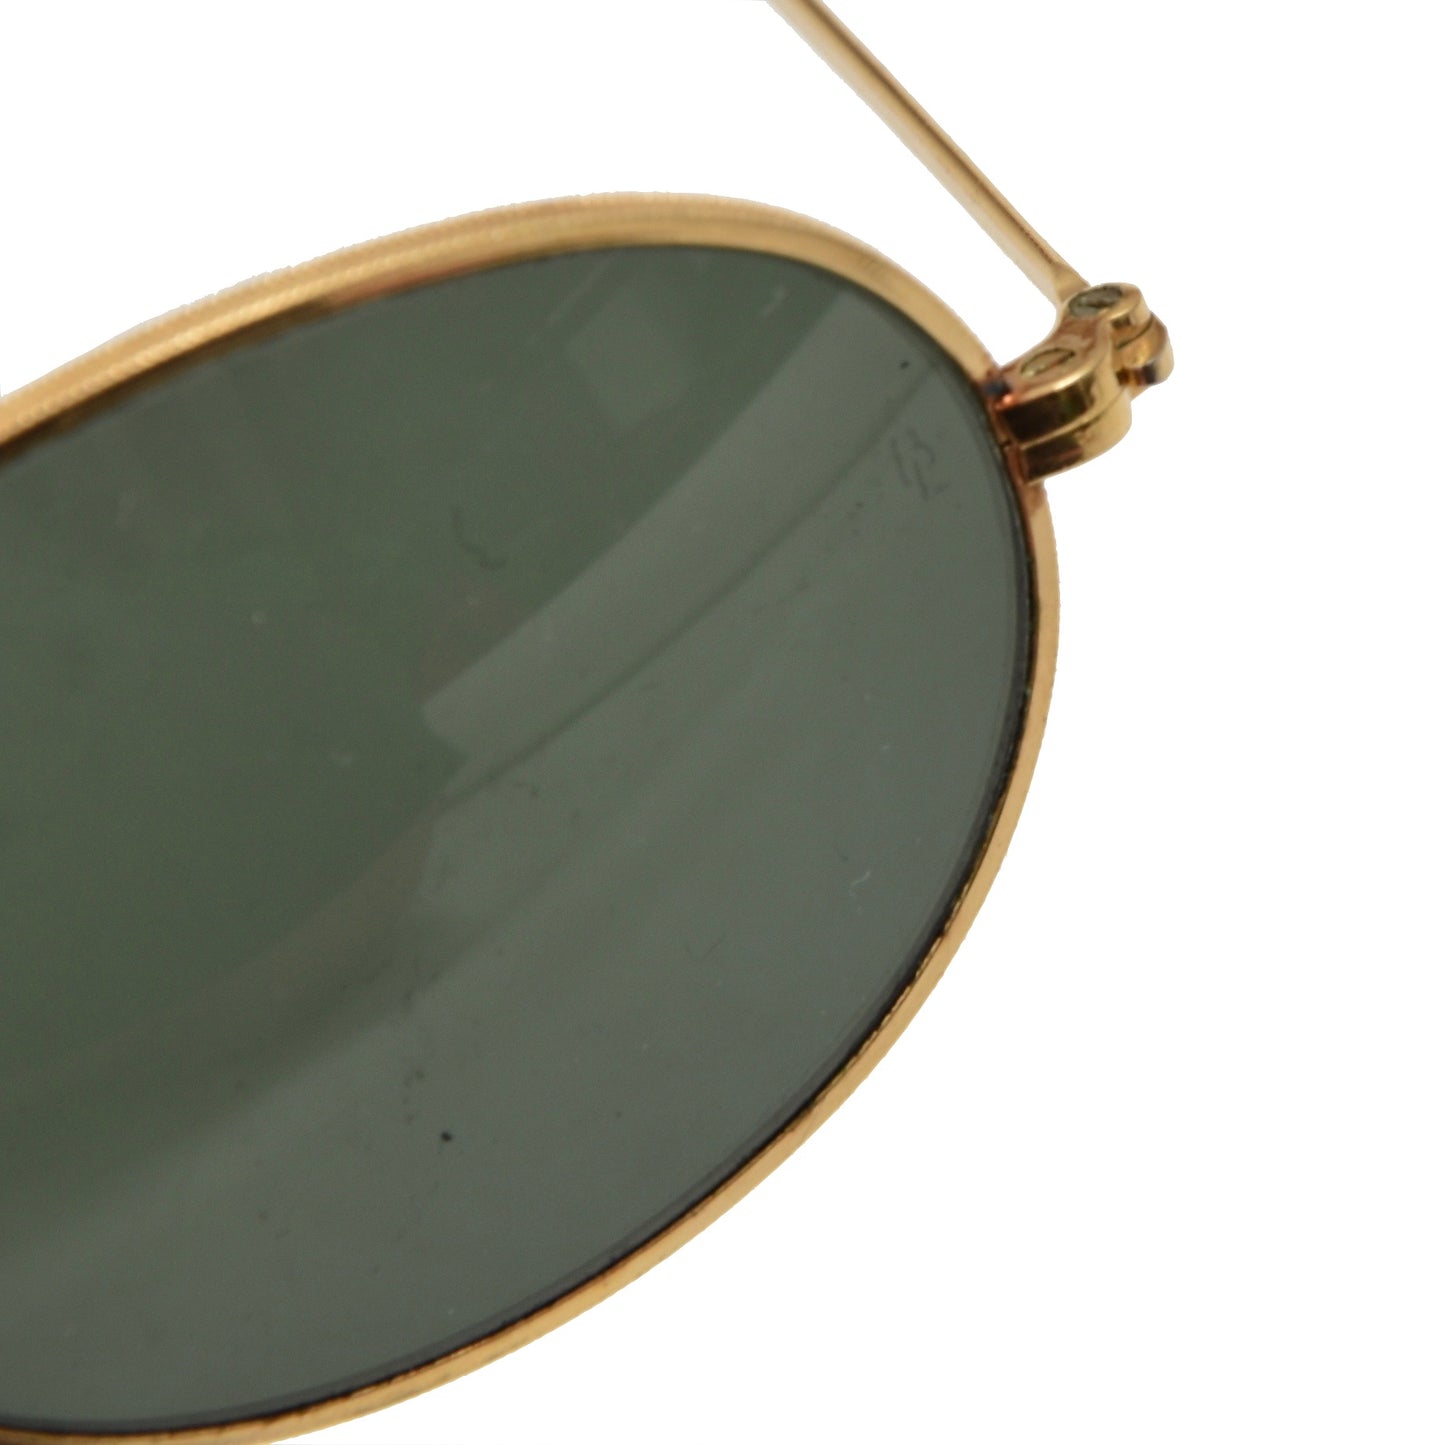 Bausch & Lomb Ray-Ban W0976 Round Sunglasses - Gold